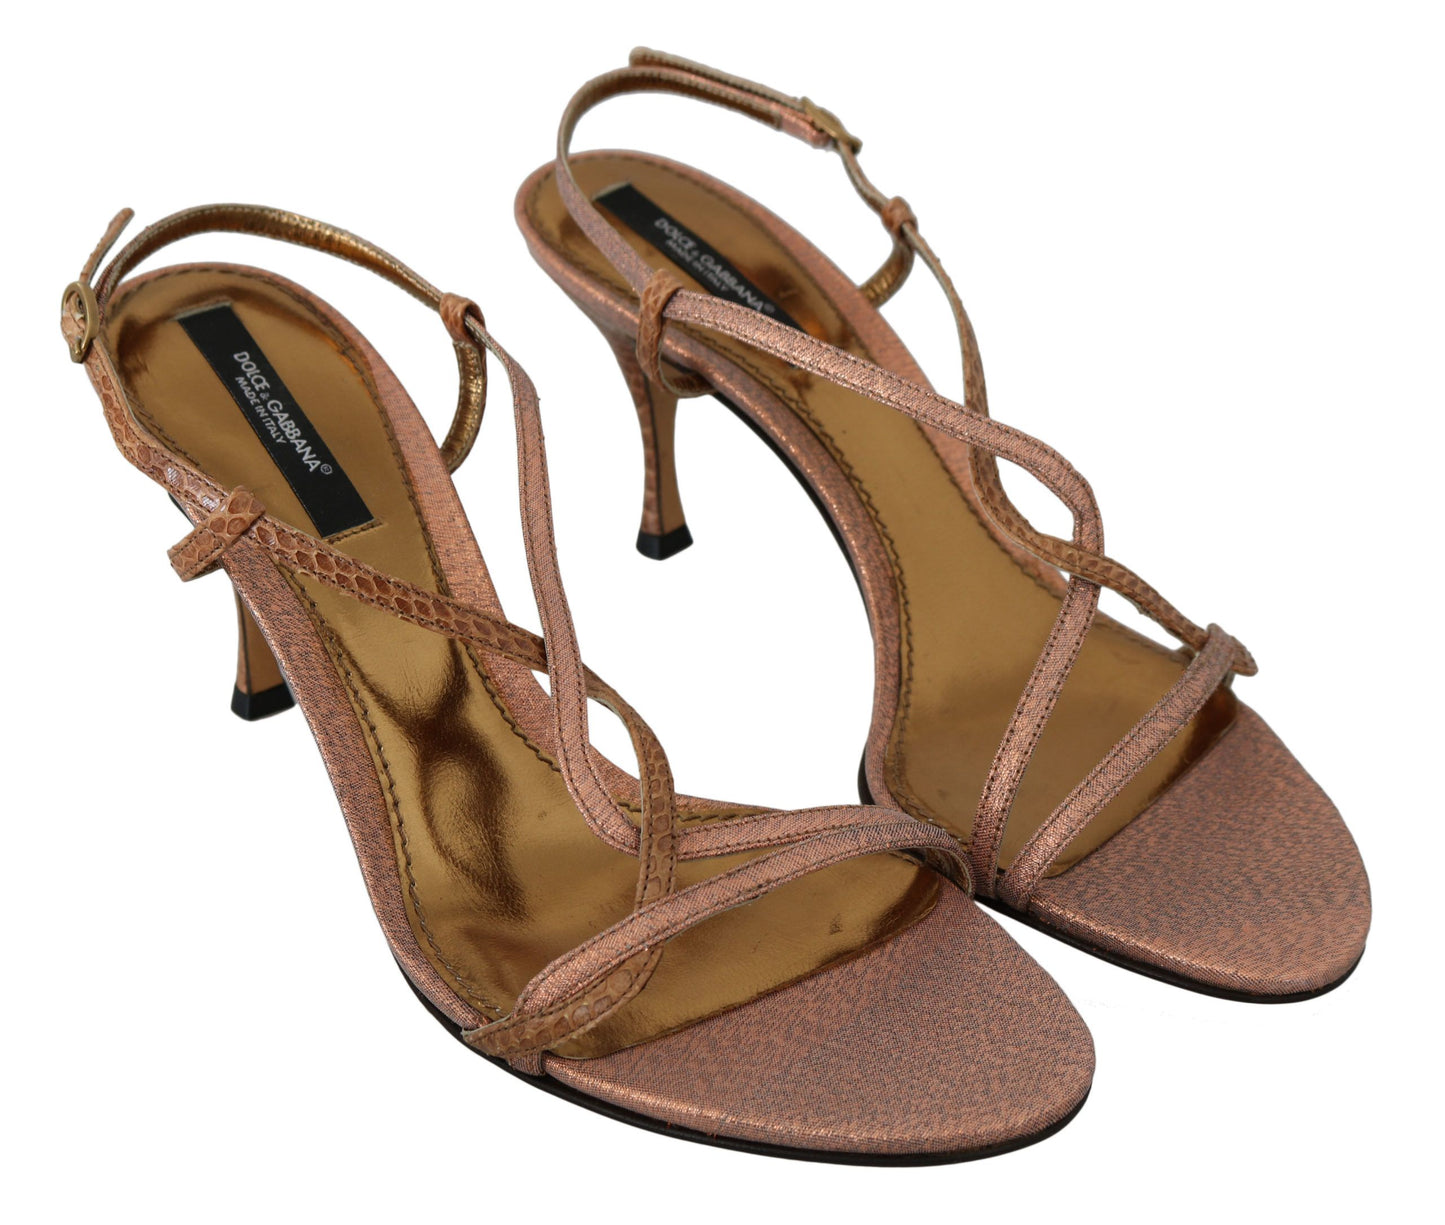 Chic Ankle Strap Sandals in Pink and Brown